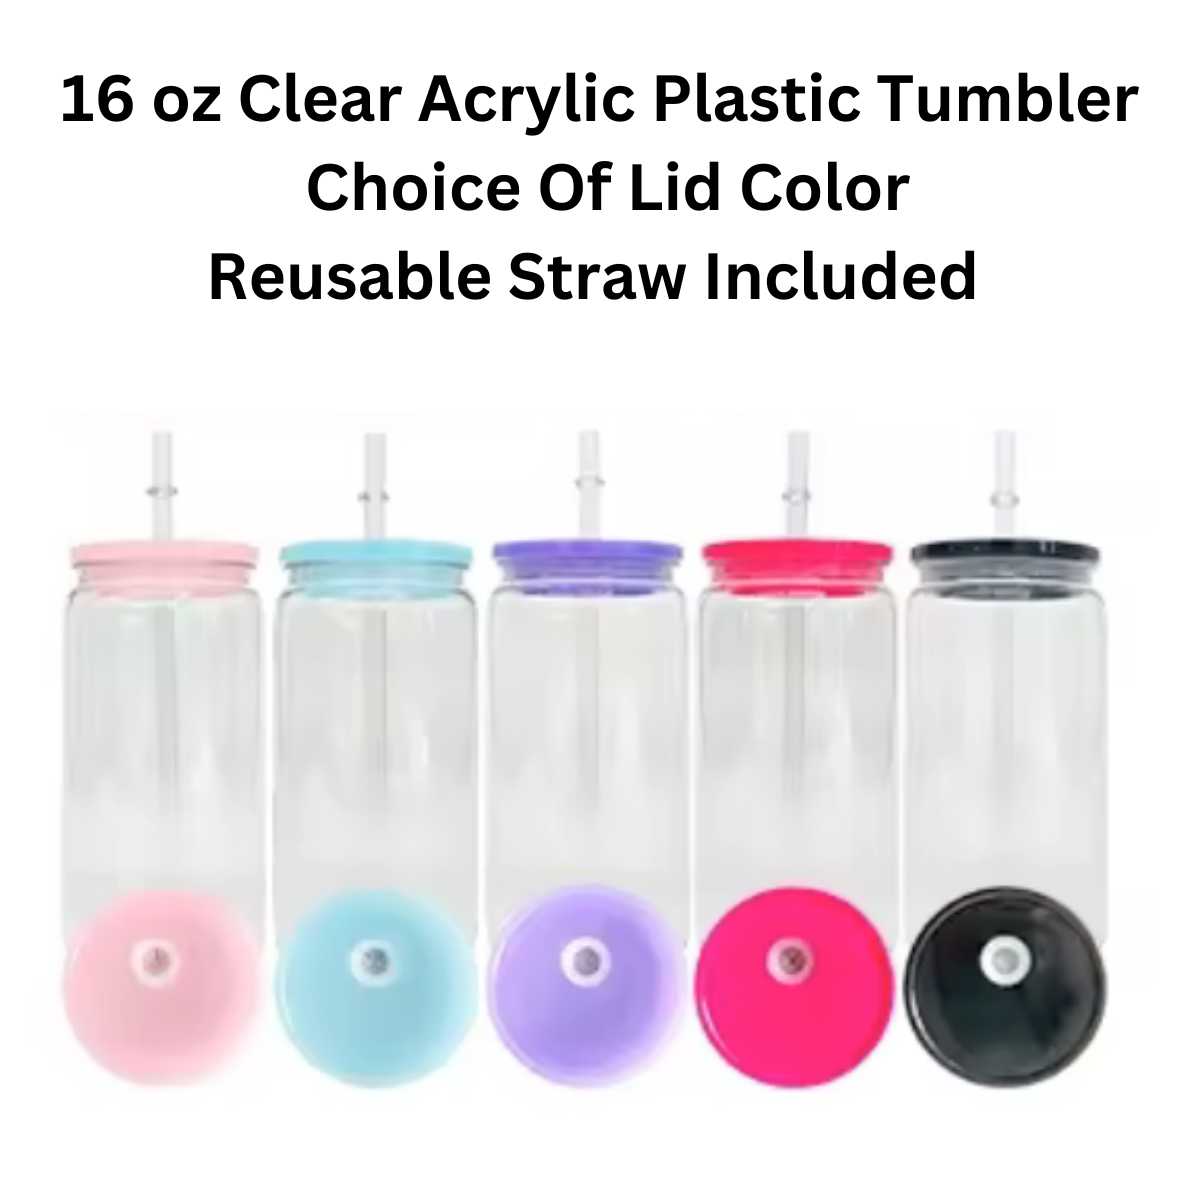 16 oz Clear Acrylic Plastic Tumbler  Choice Of Lid Color Reusable Straw Included